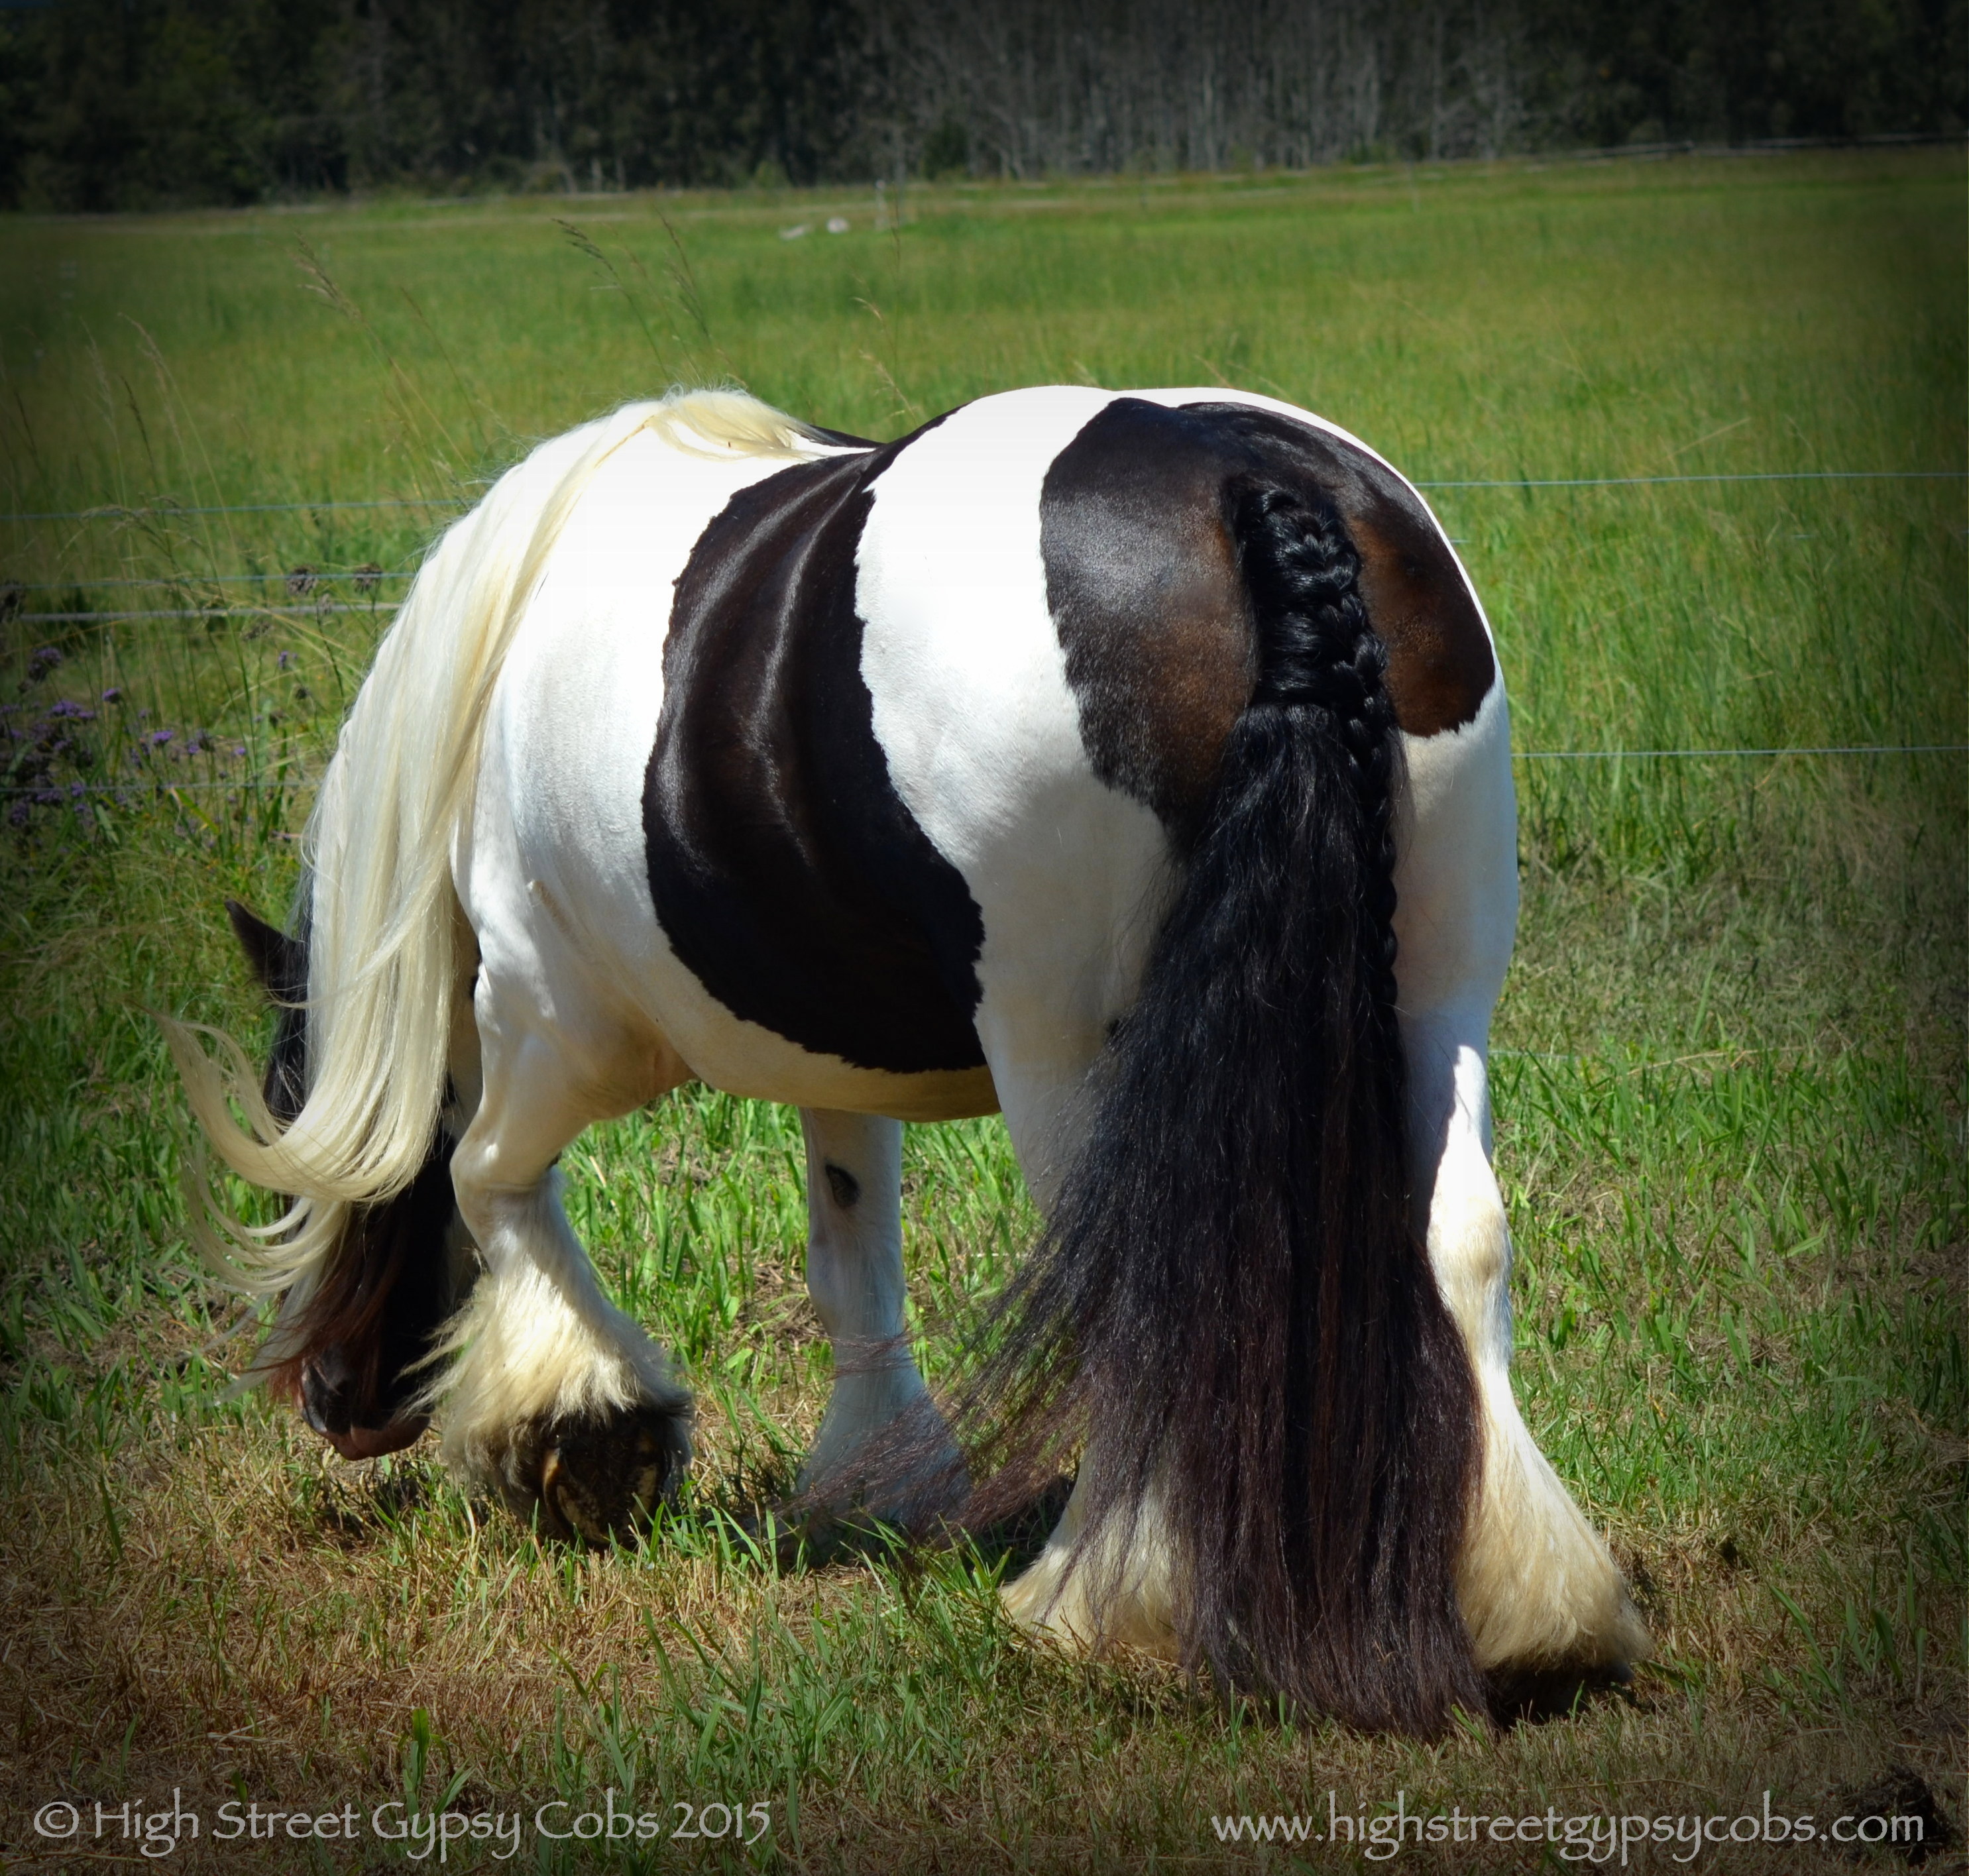 gypsy cob for sale, gypsy horse for sale, blue roan tobiano colt, gypsy vanner at High Street Gypsy Cobs Australia, heavy horse for sale, blue roan pinto, draft horse, foal, colt,